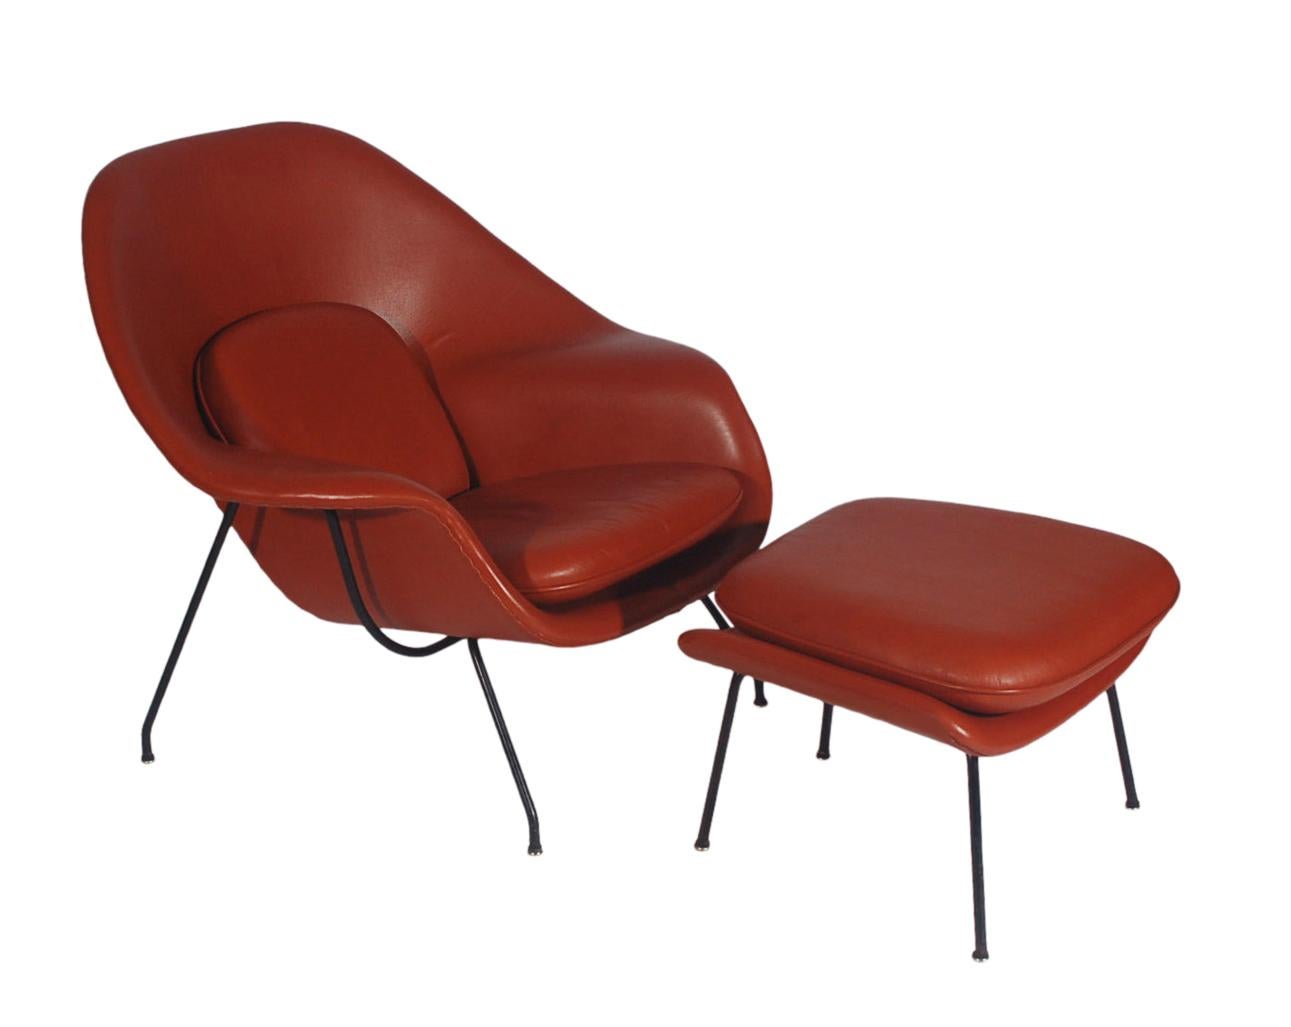 Mid-20th Century Mid-Century Modern Womb Chair and Ottoman by Eero Saarinen for Knoll in Leather